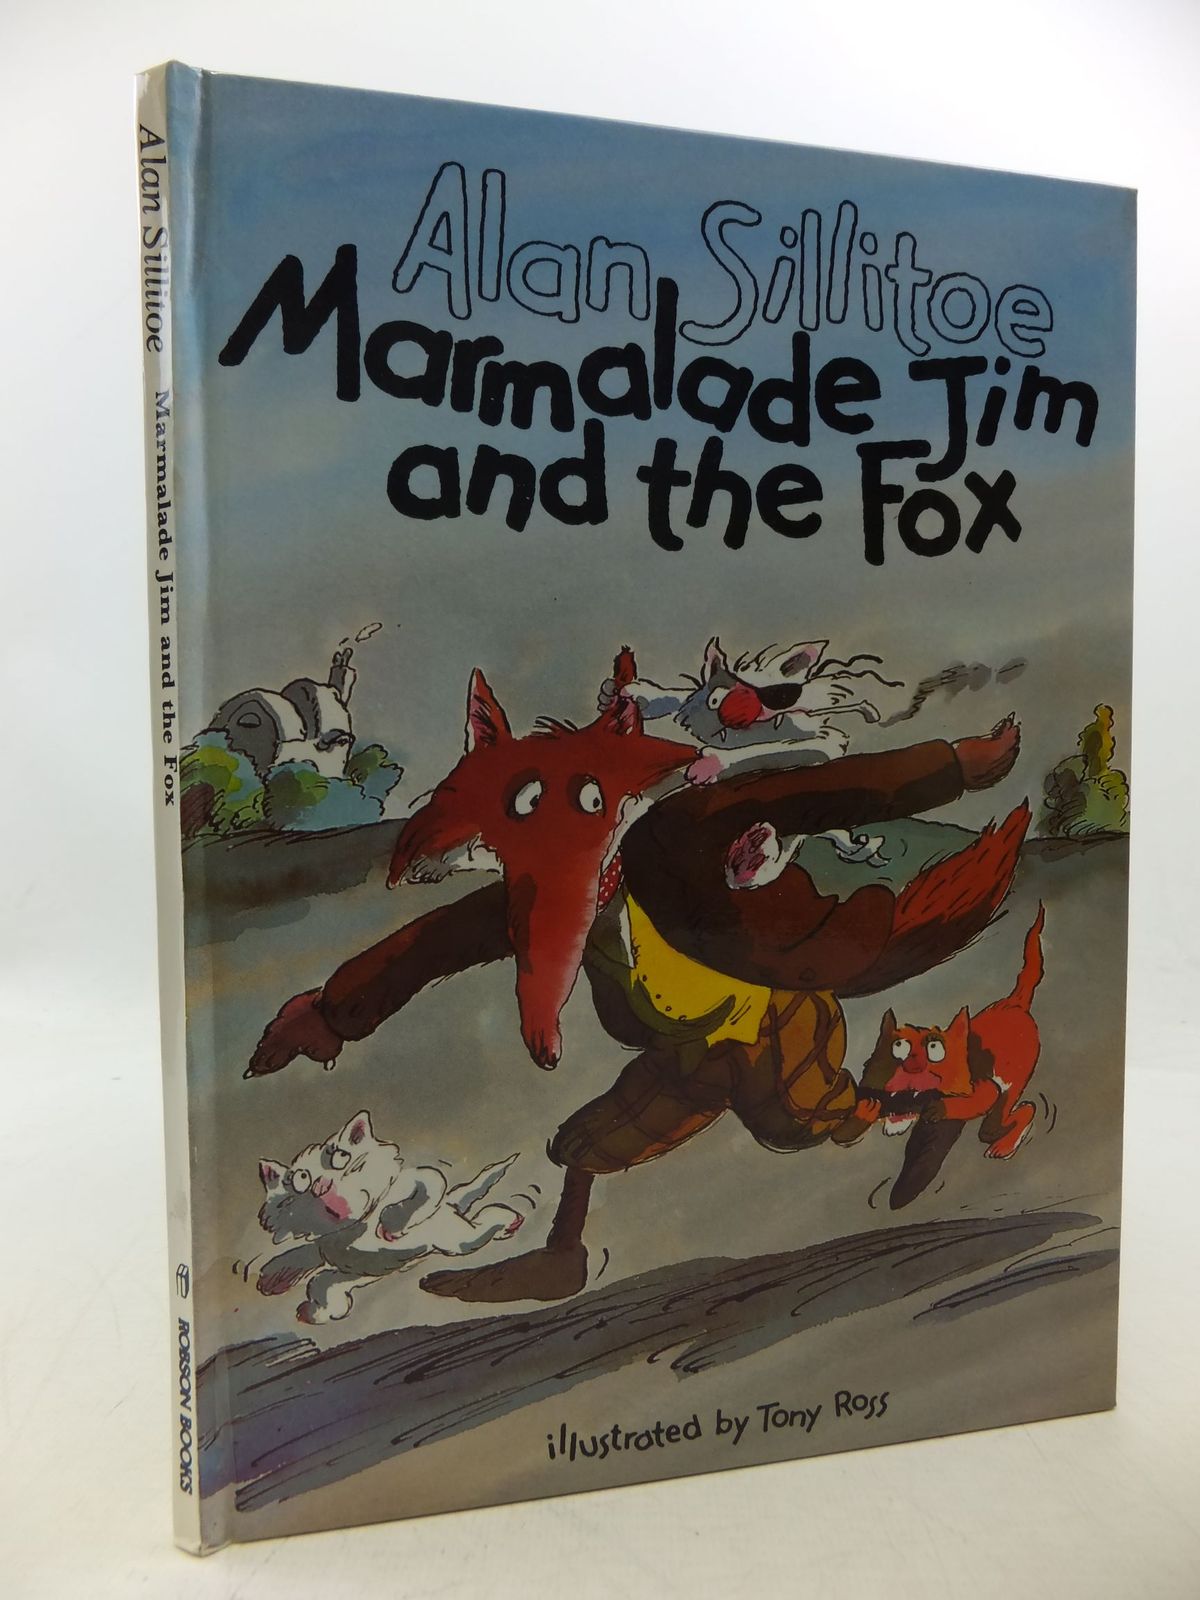 Photo of MARMALADE JIM AND THE FOX written by Sillitoe, Alan illustrated by Ross, Tony published by Robson Books (STOCK CODE: 1710120)  for sale by Stella & Rose's Books